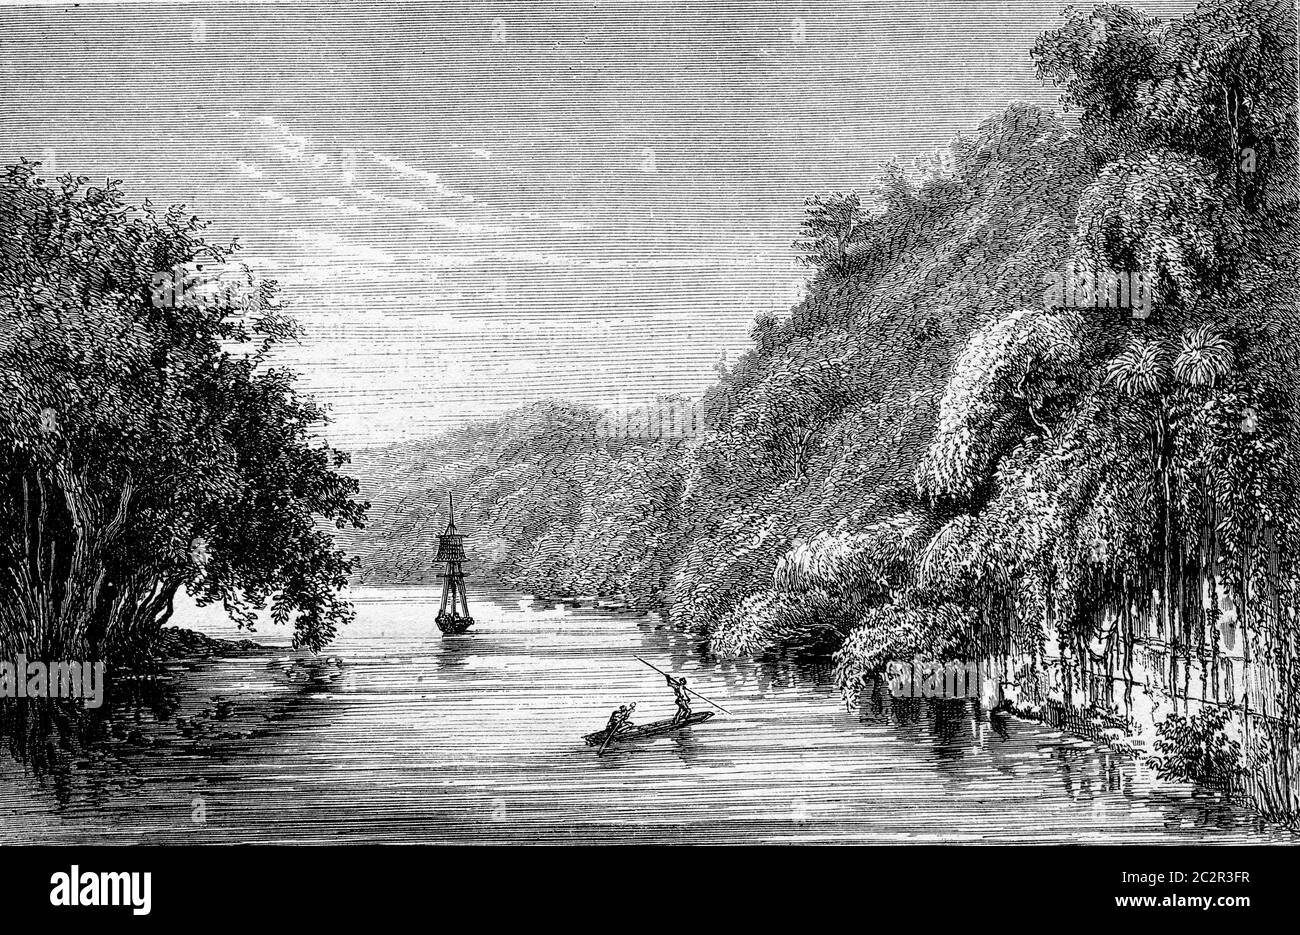 Republic of Guatemala, Dulce River, vintage engraved illustration. Magasin Pittoresque 1867. Stock Photo